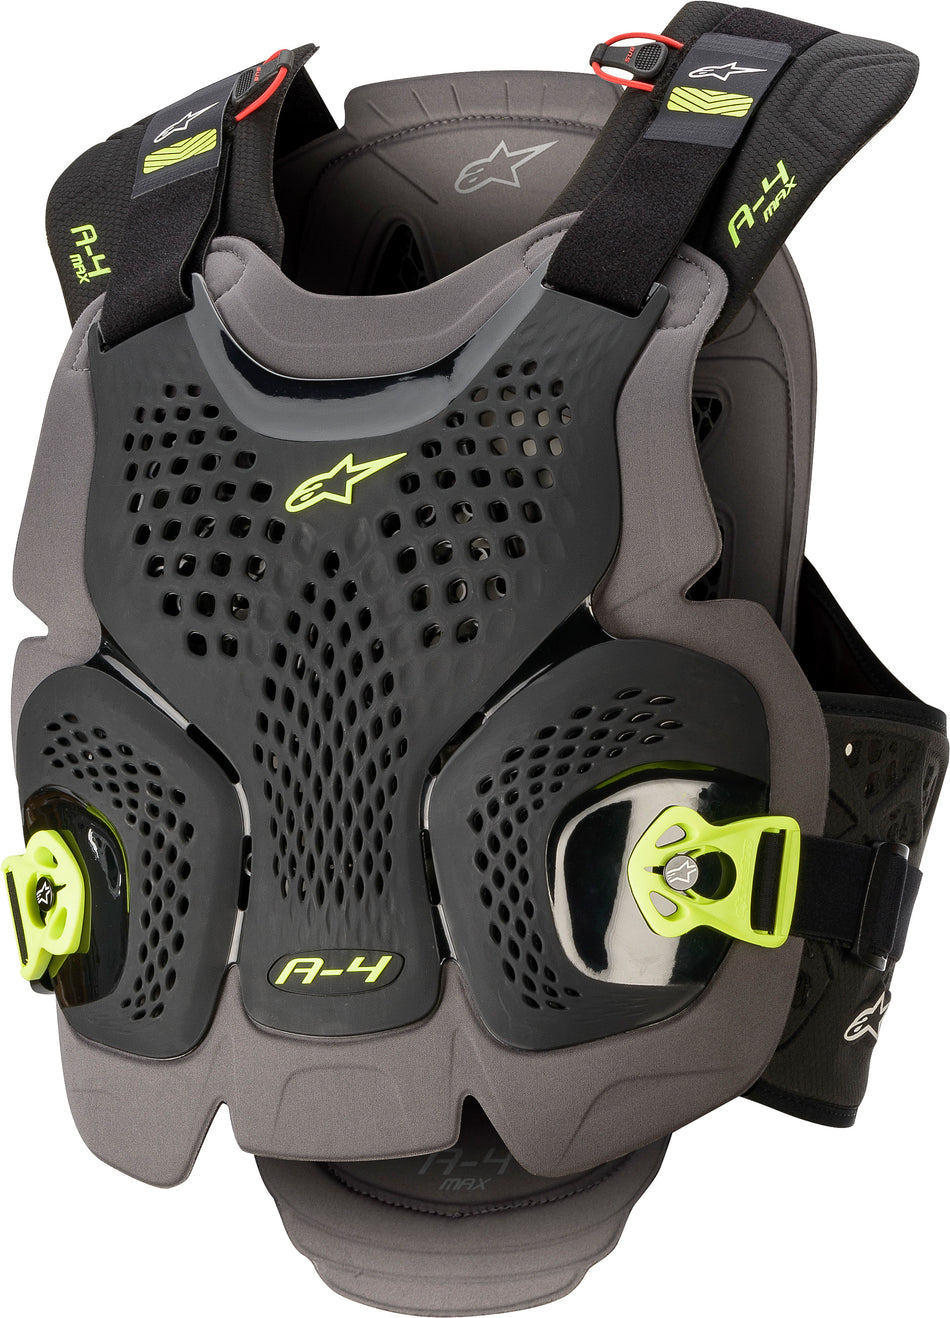 ALPINESTARS A-4 Max Chest Protector Blk/Anth/Fluo Ylw Xs/Sm 6701520-1155-XS/S